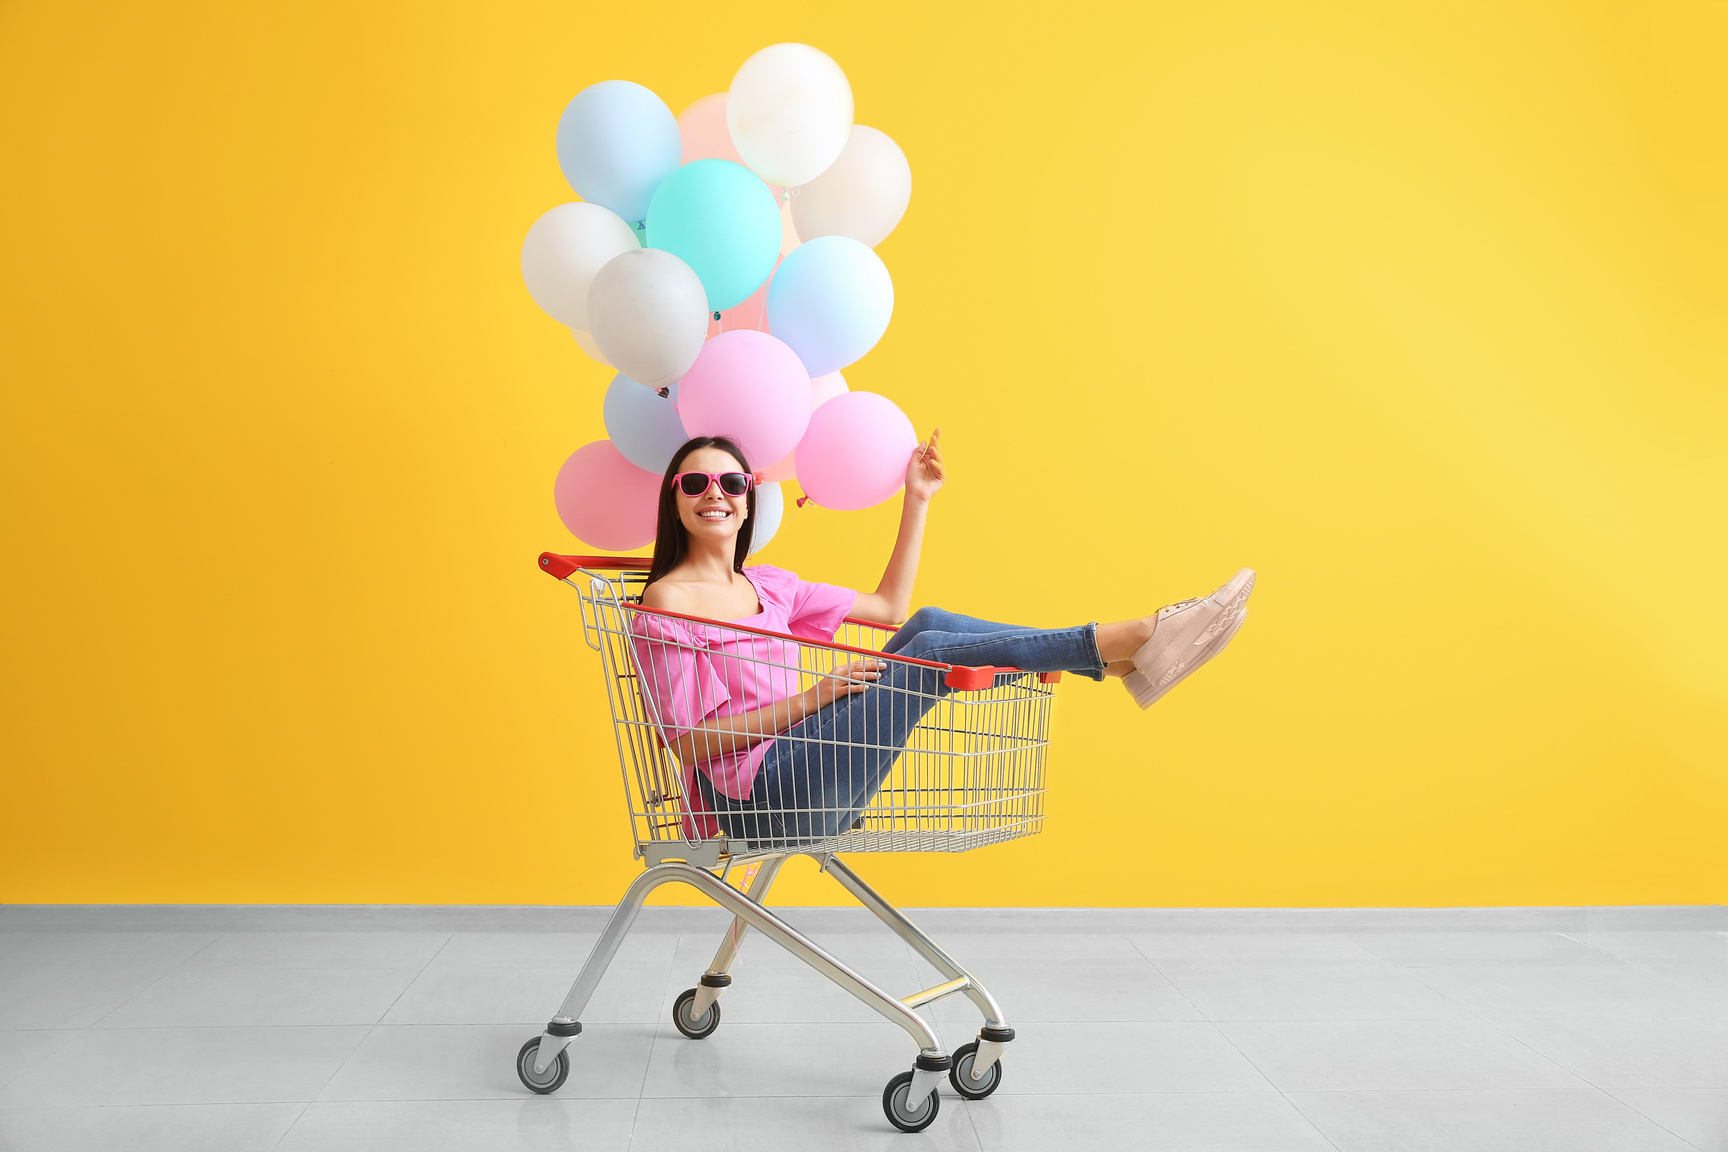 Young Woman with Shopping Cart and Balloons near Color Wall